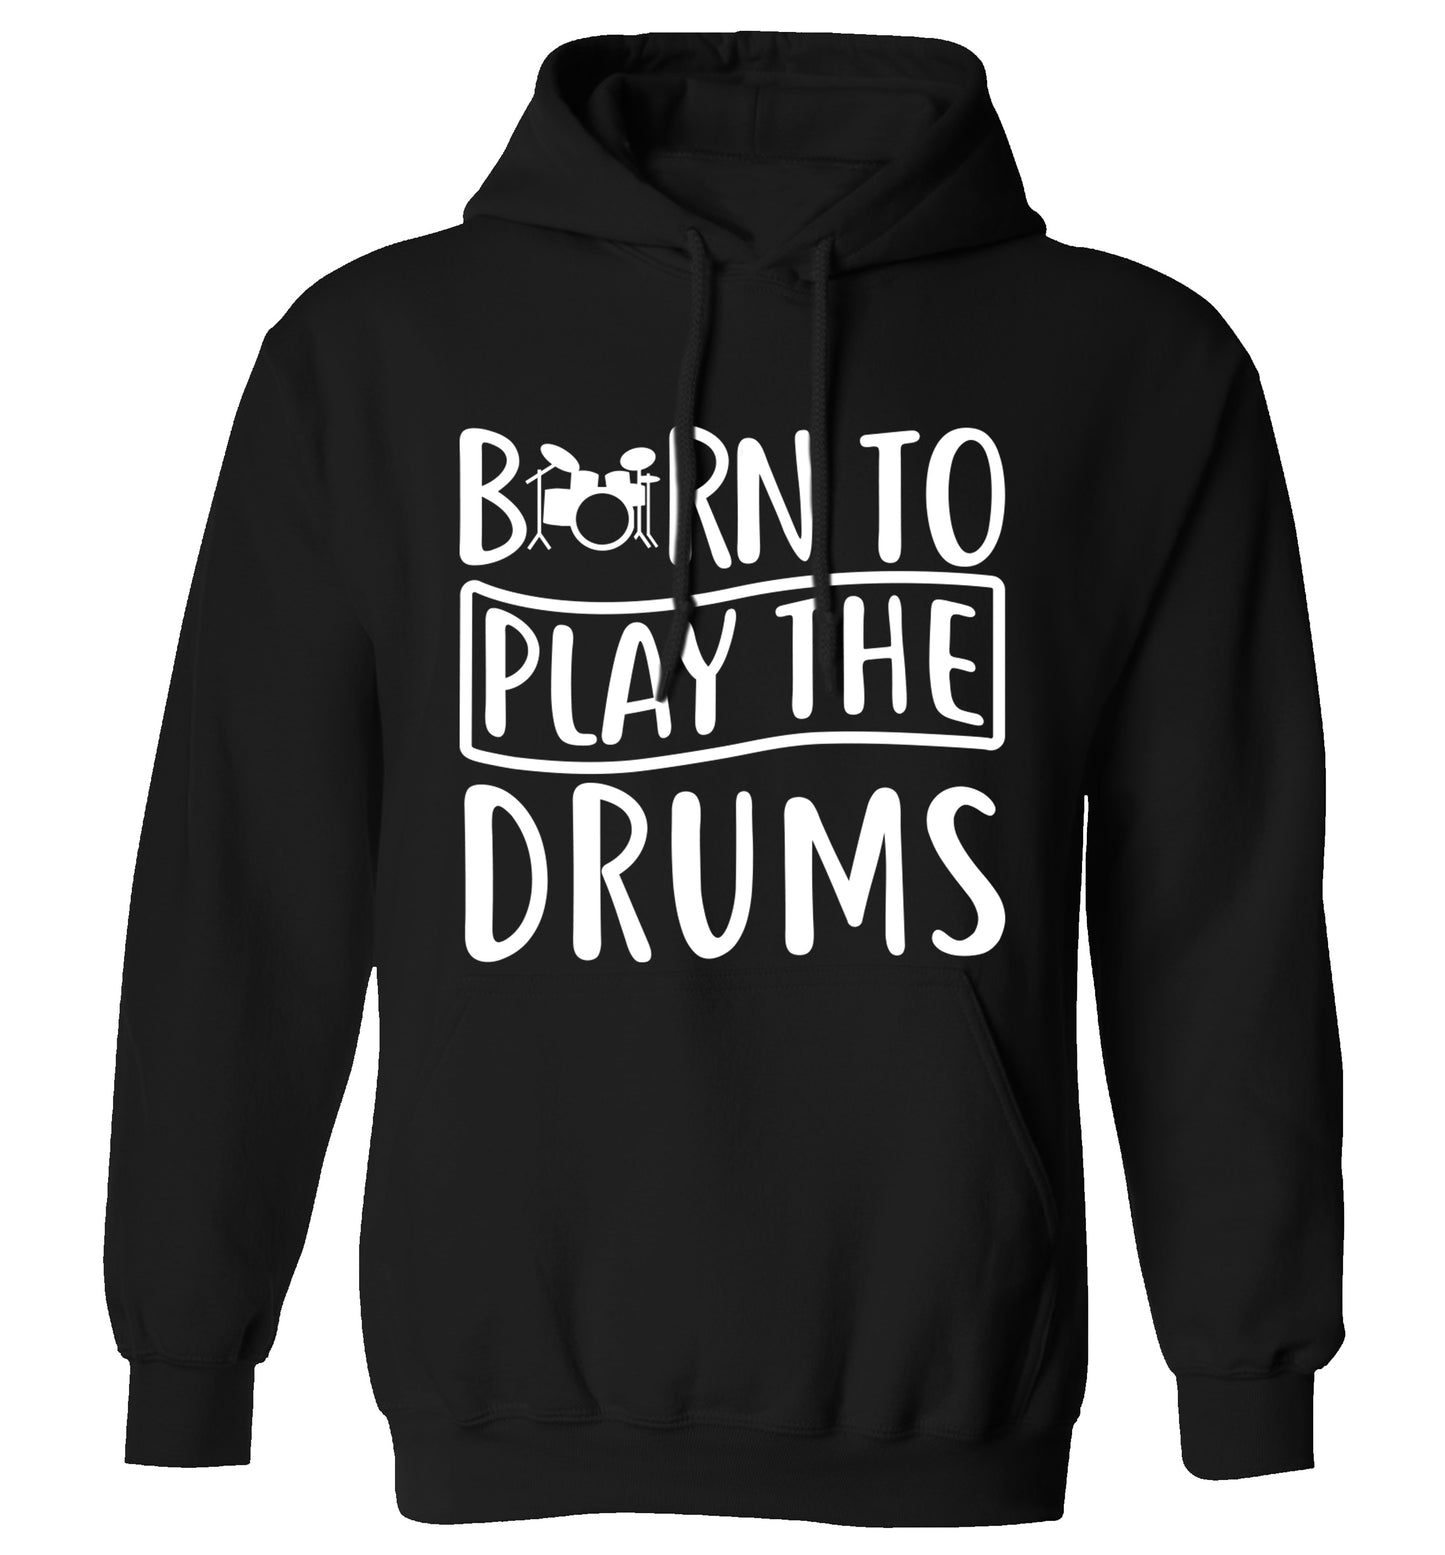 Born to play the drums adults unisex black hoodie 2XL